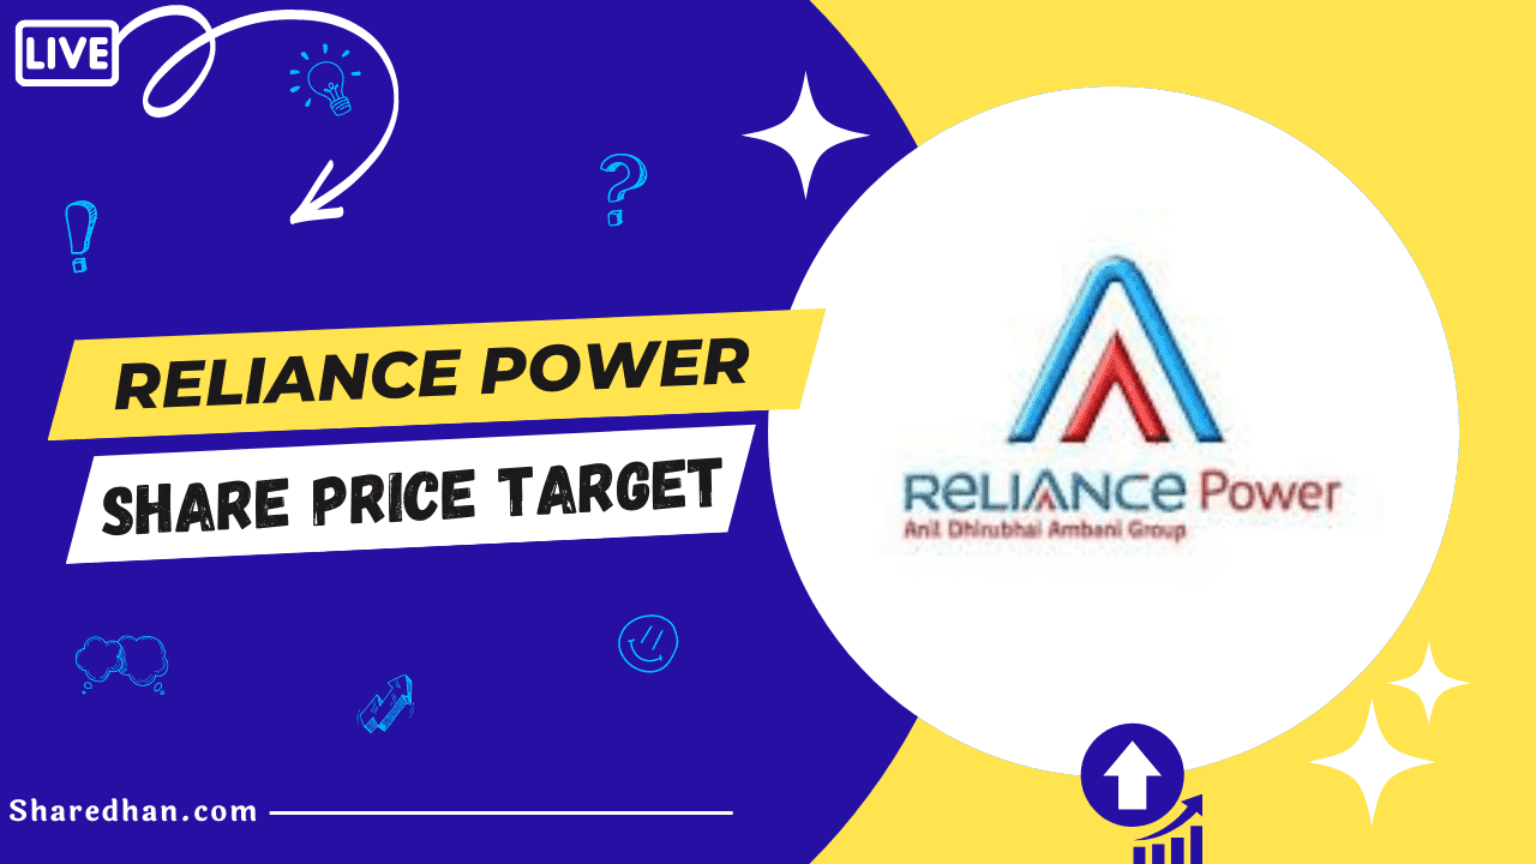 Reliance Power Share Price Target 2023, 2024, 2025, 2027, 2030 to 2050